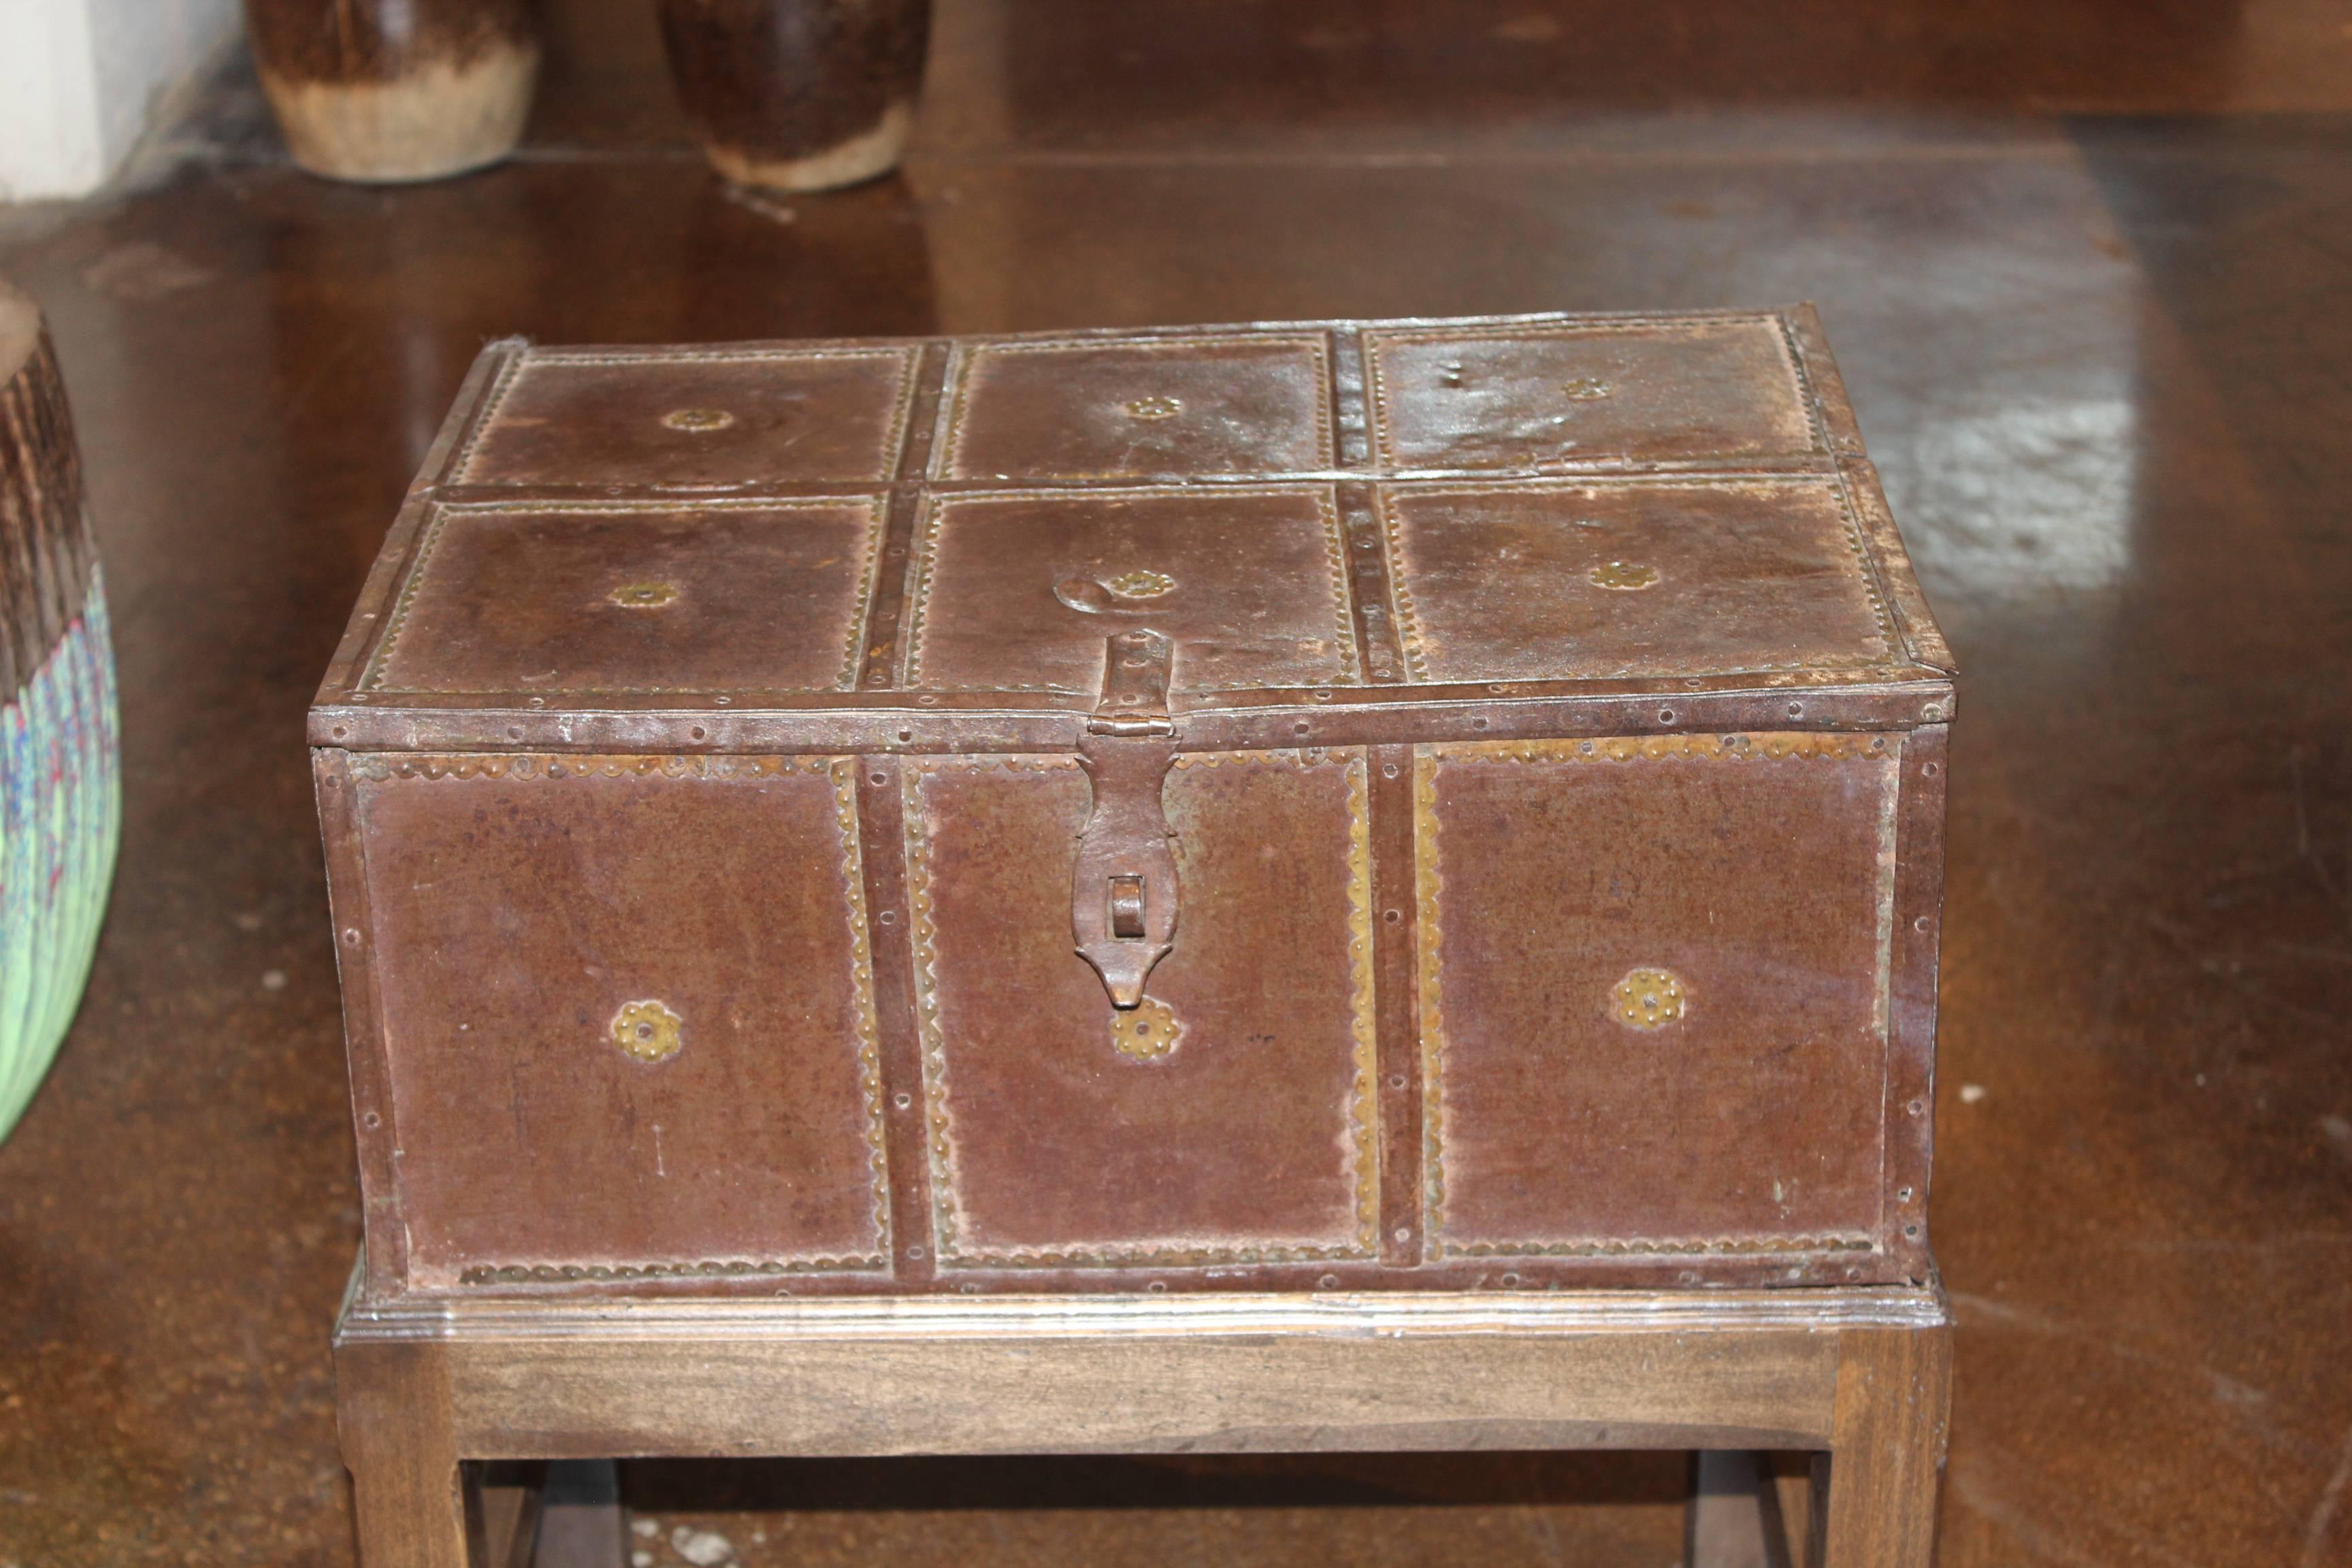 Antique Large Spanish Storage Box on Stand. Indian rosewood,
circa 1900.